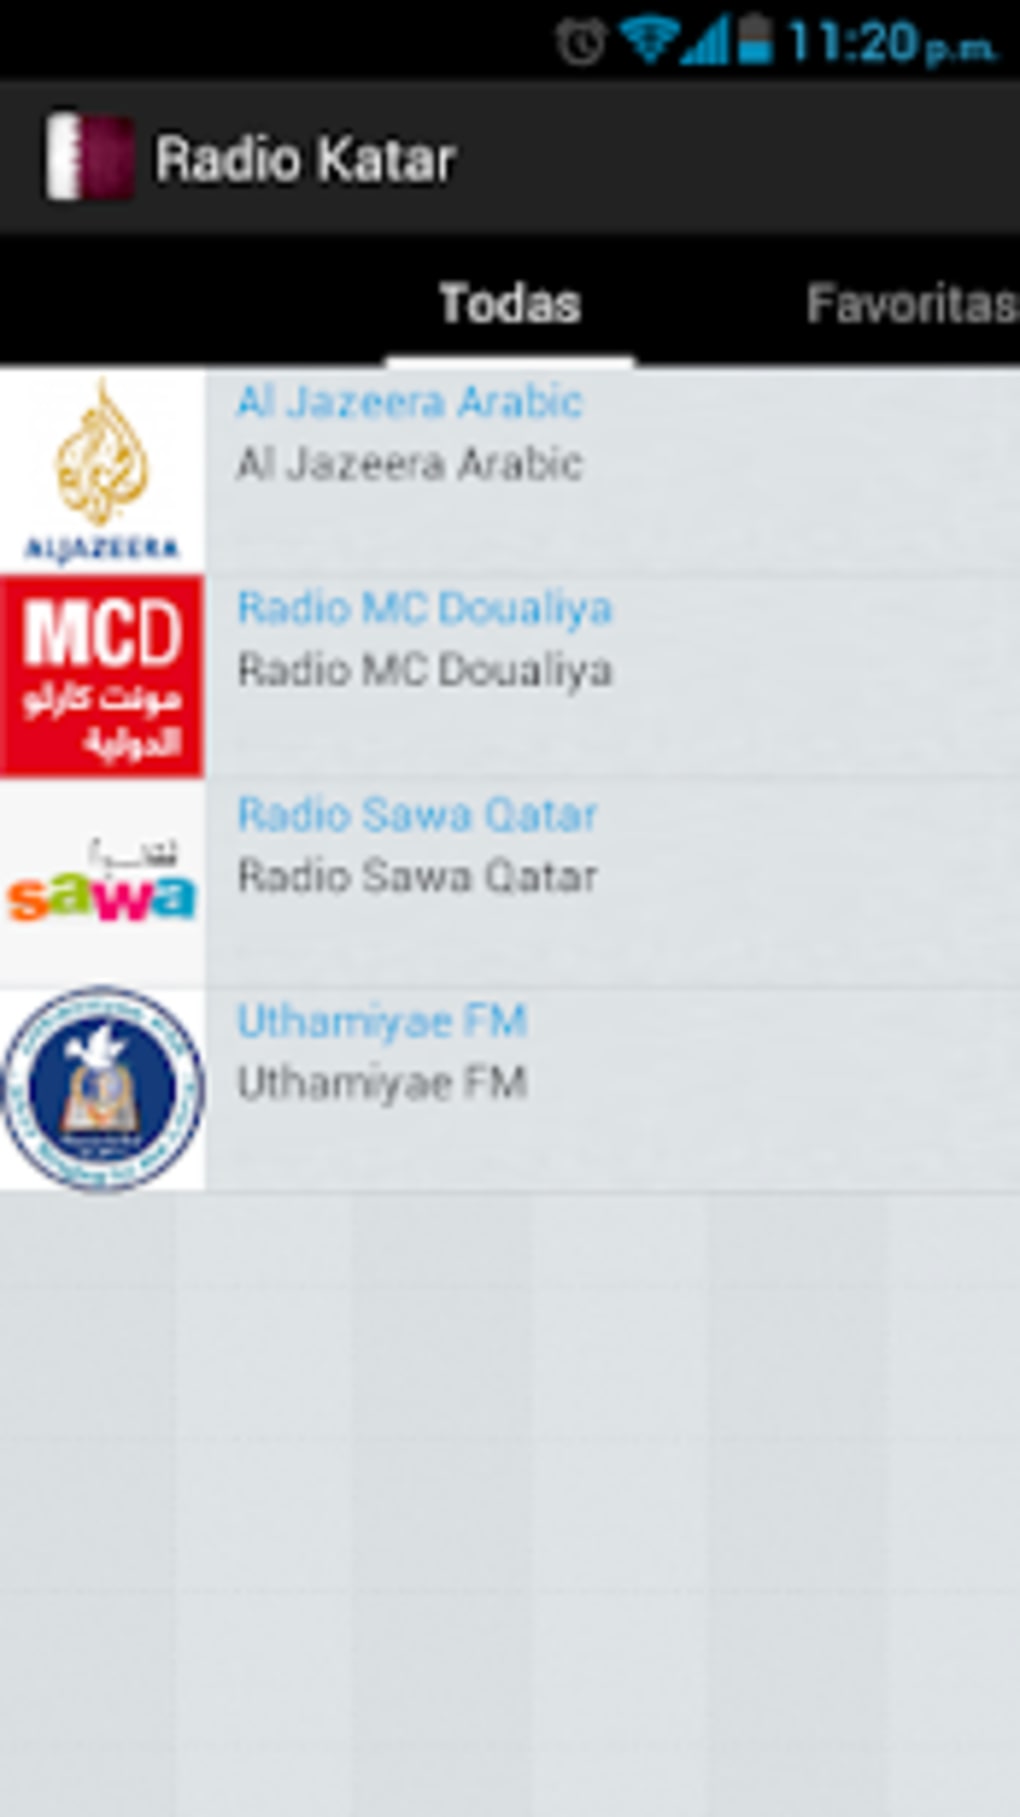 Radio Qatar Apk For Android Download - get freee robux 2k19 10 android download apk